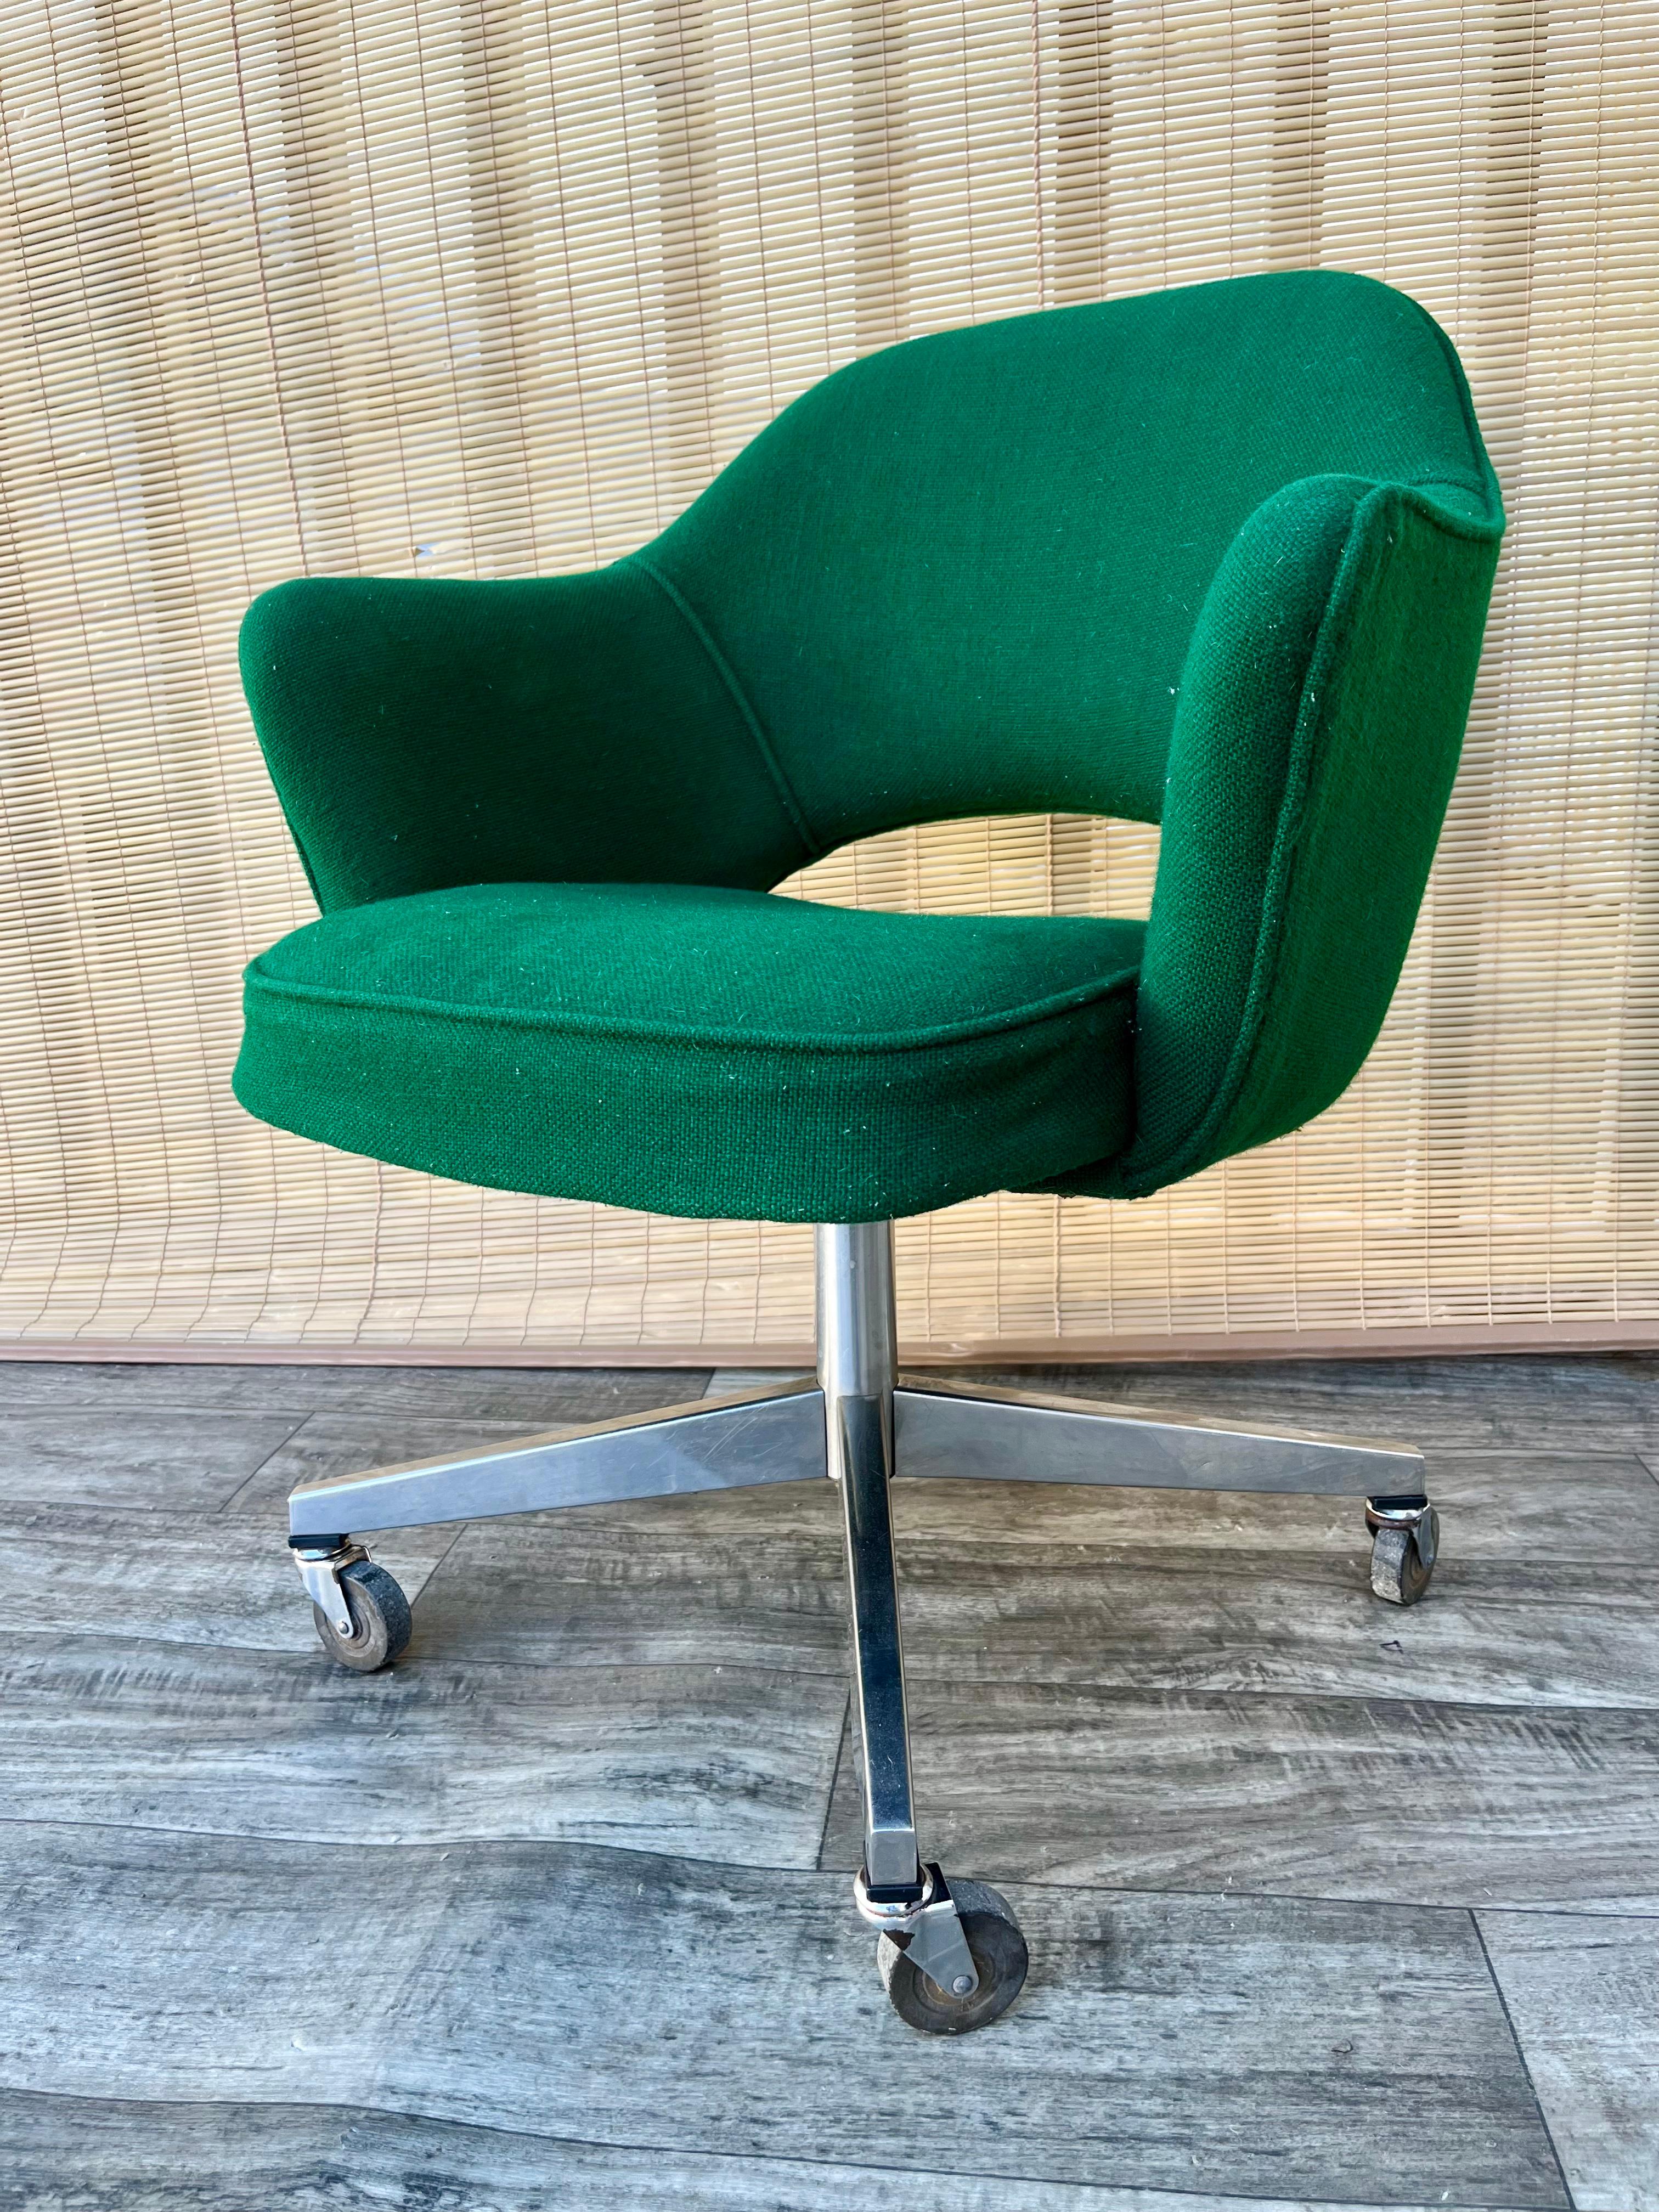 Vintage Mid Century Modern Office Chair with arms by Saarinen for Knoll. Circa 1970s 
Feature the original hunter green twill upholstery and casters for easy mobility.
The chair smoothly tilts and swivels.
In good original condition with signs of